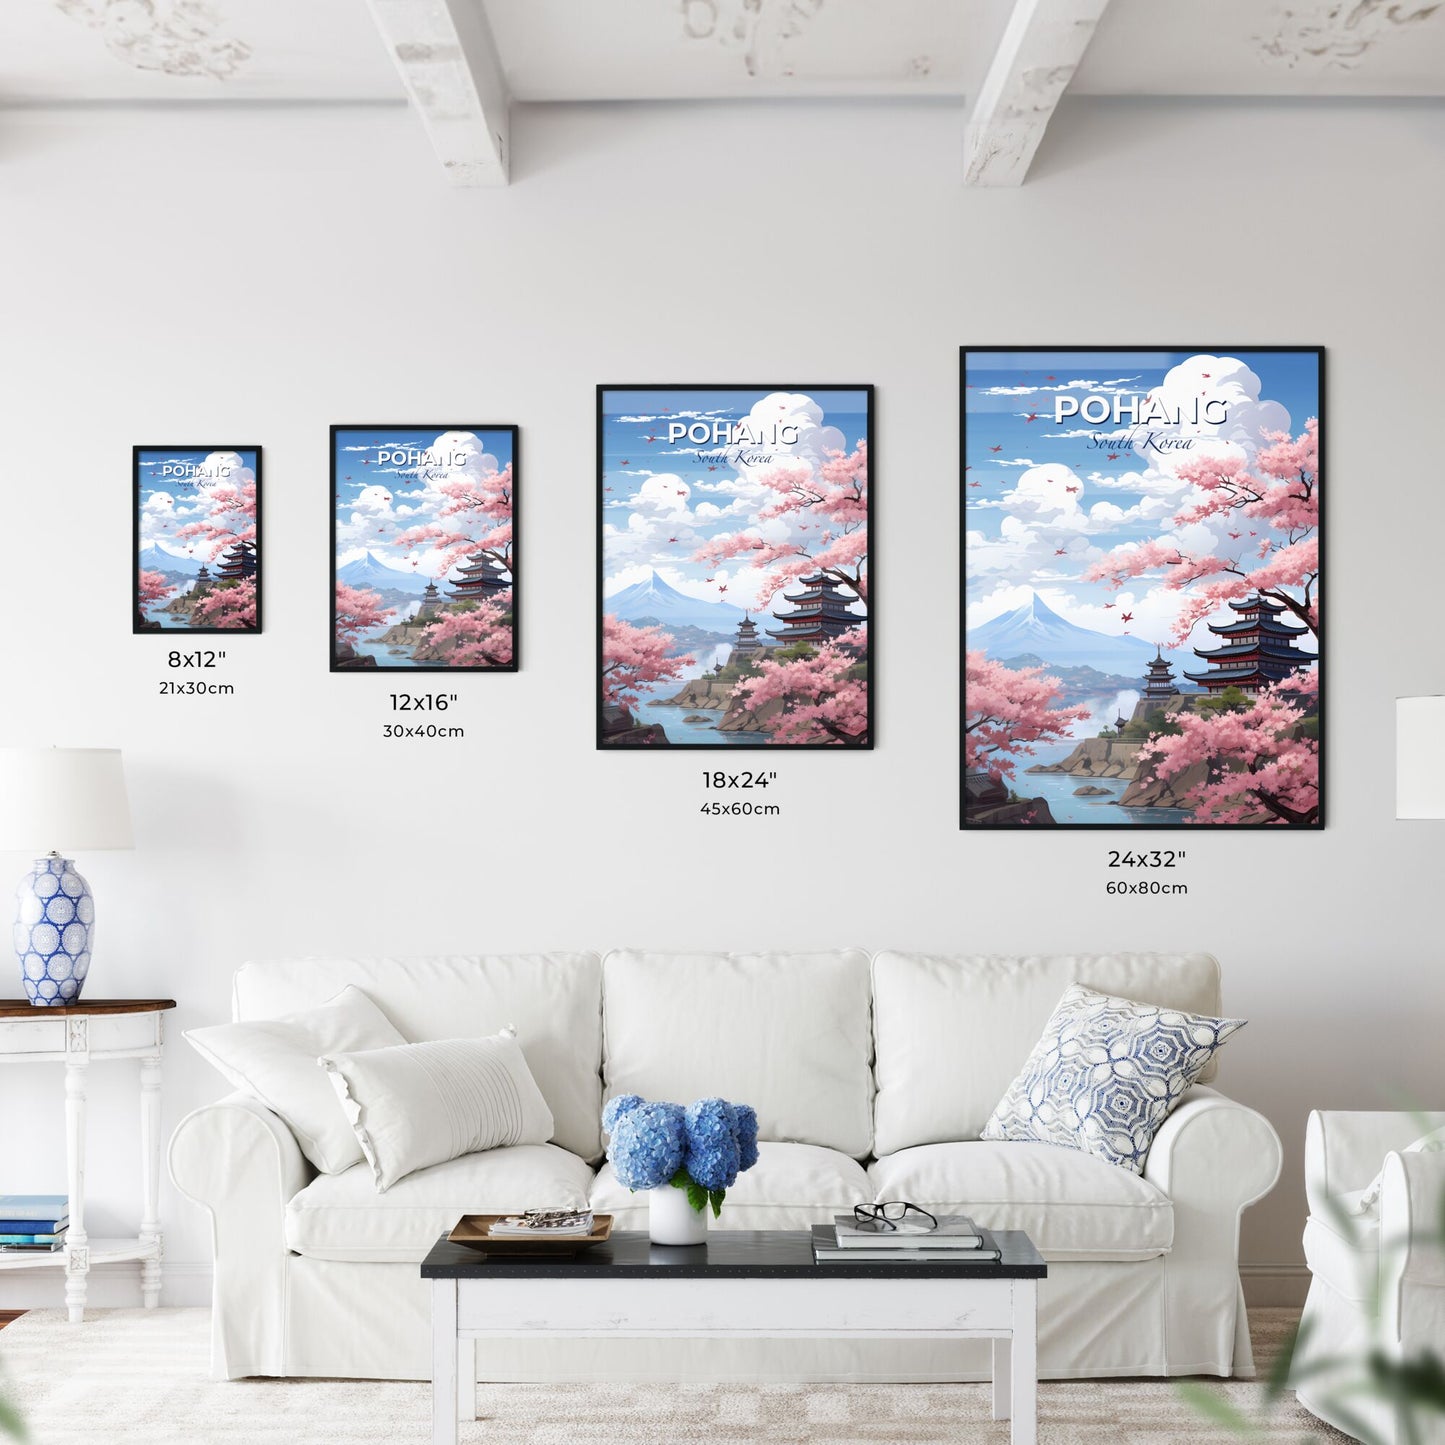 Tranquil Pagoda Landscape with Cherry Blossoms, Pohang Skyline Artwork with Vibrant Colors and Artistic Flair Default Title